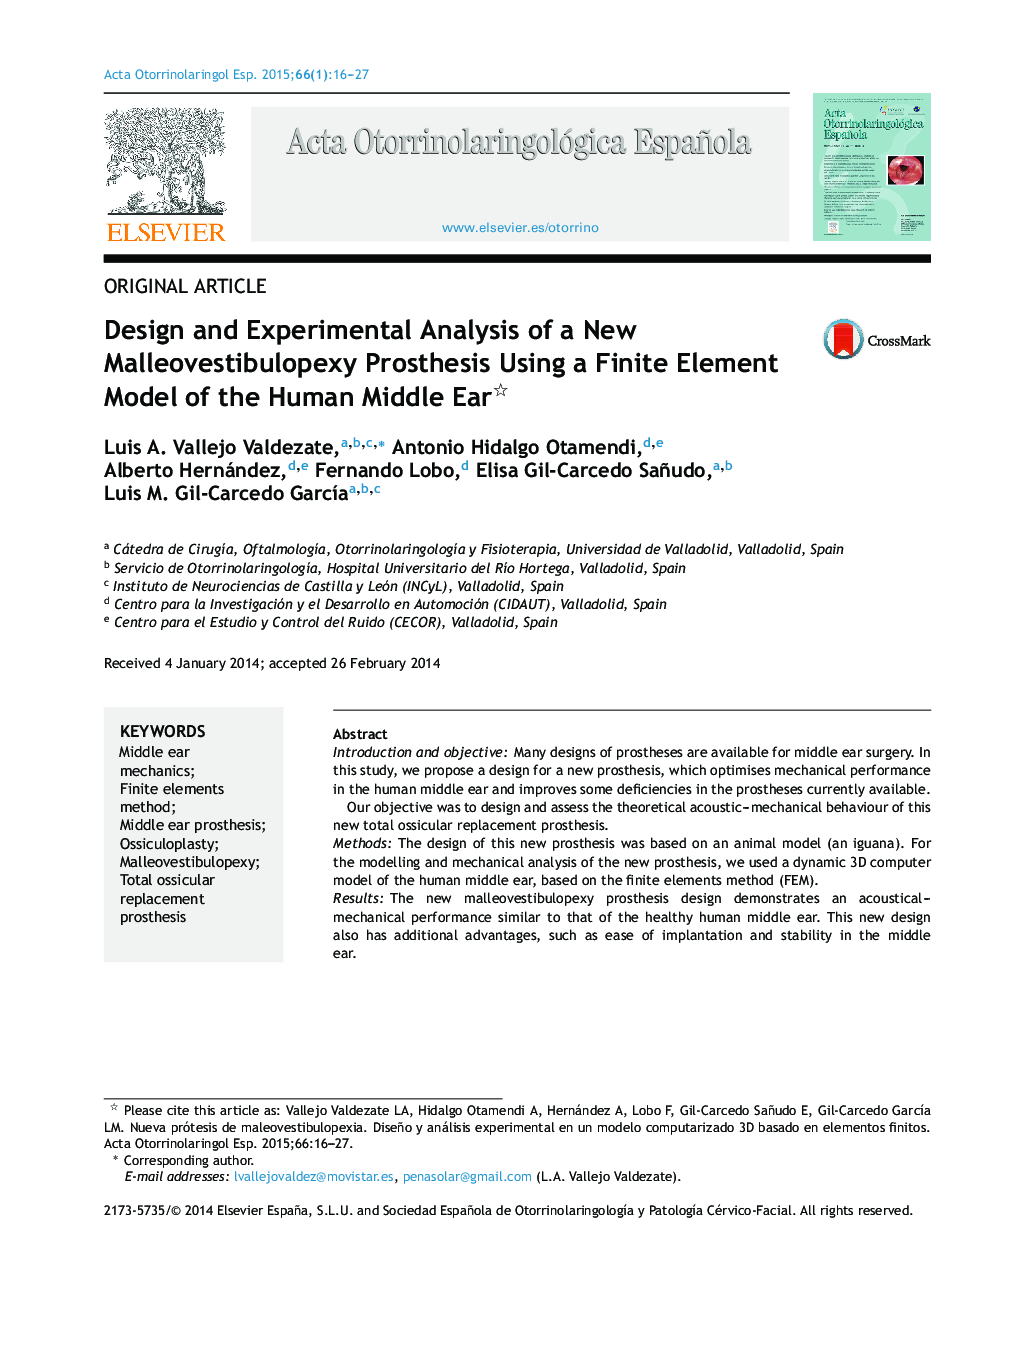 Design and Experimental Analysis of a New Malleovestibulopexy Prosthesis Using a Finite Element Model of the Human Middle Ear 